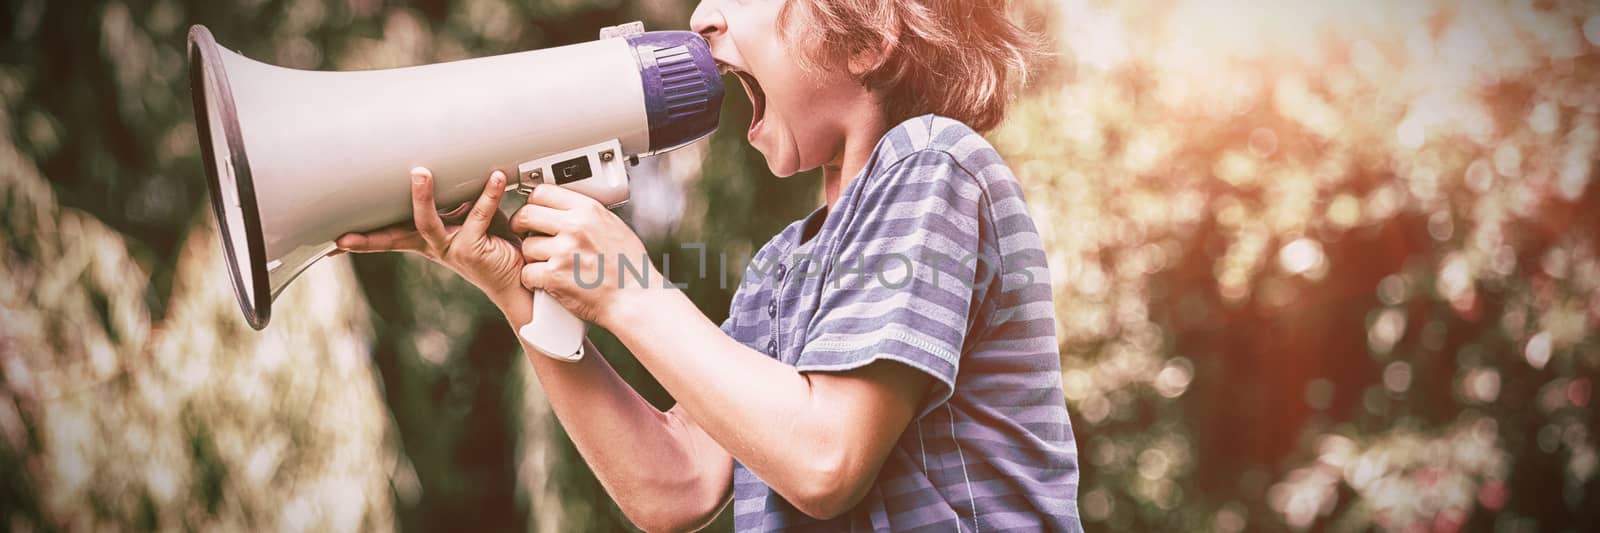 A little boy is screaming with a megaphone by Wavebreakmedia